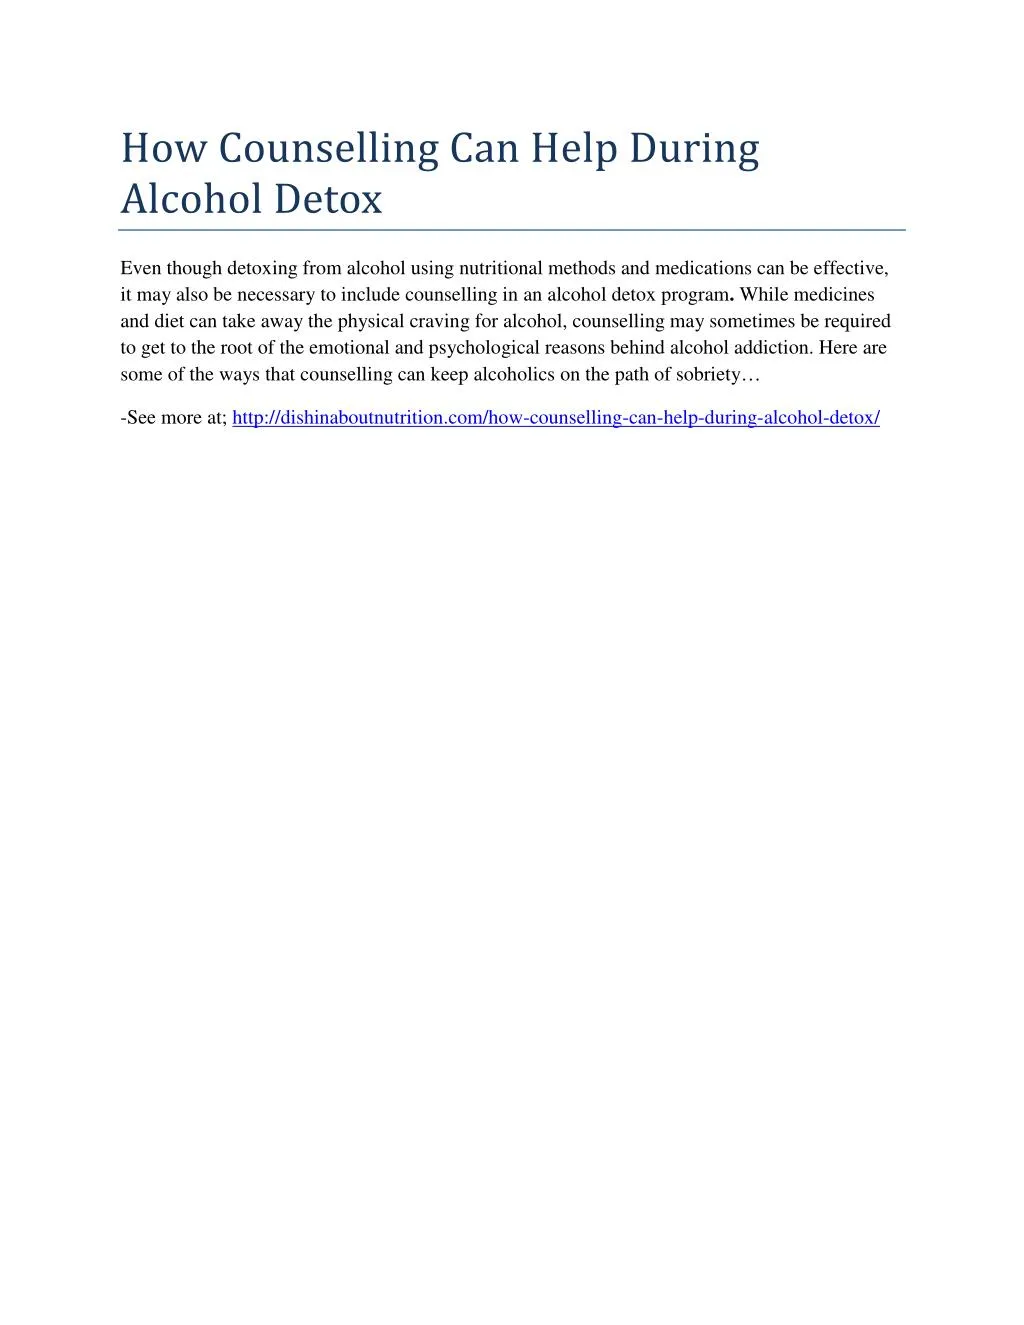 how counselling can help during alcohol detox